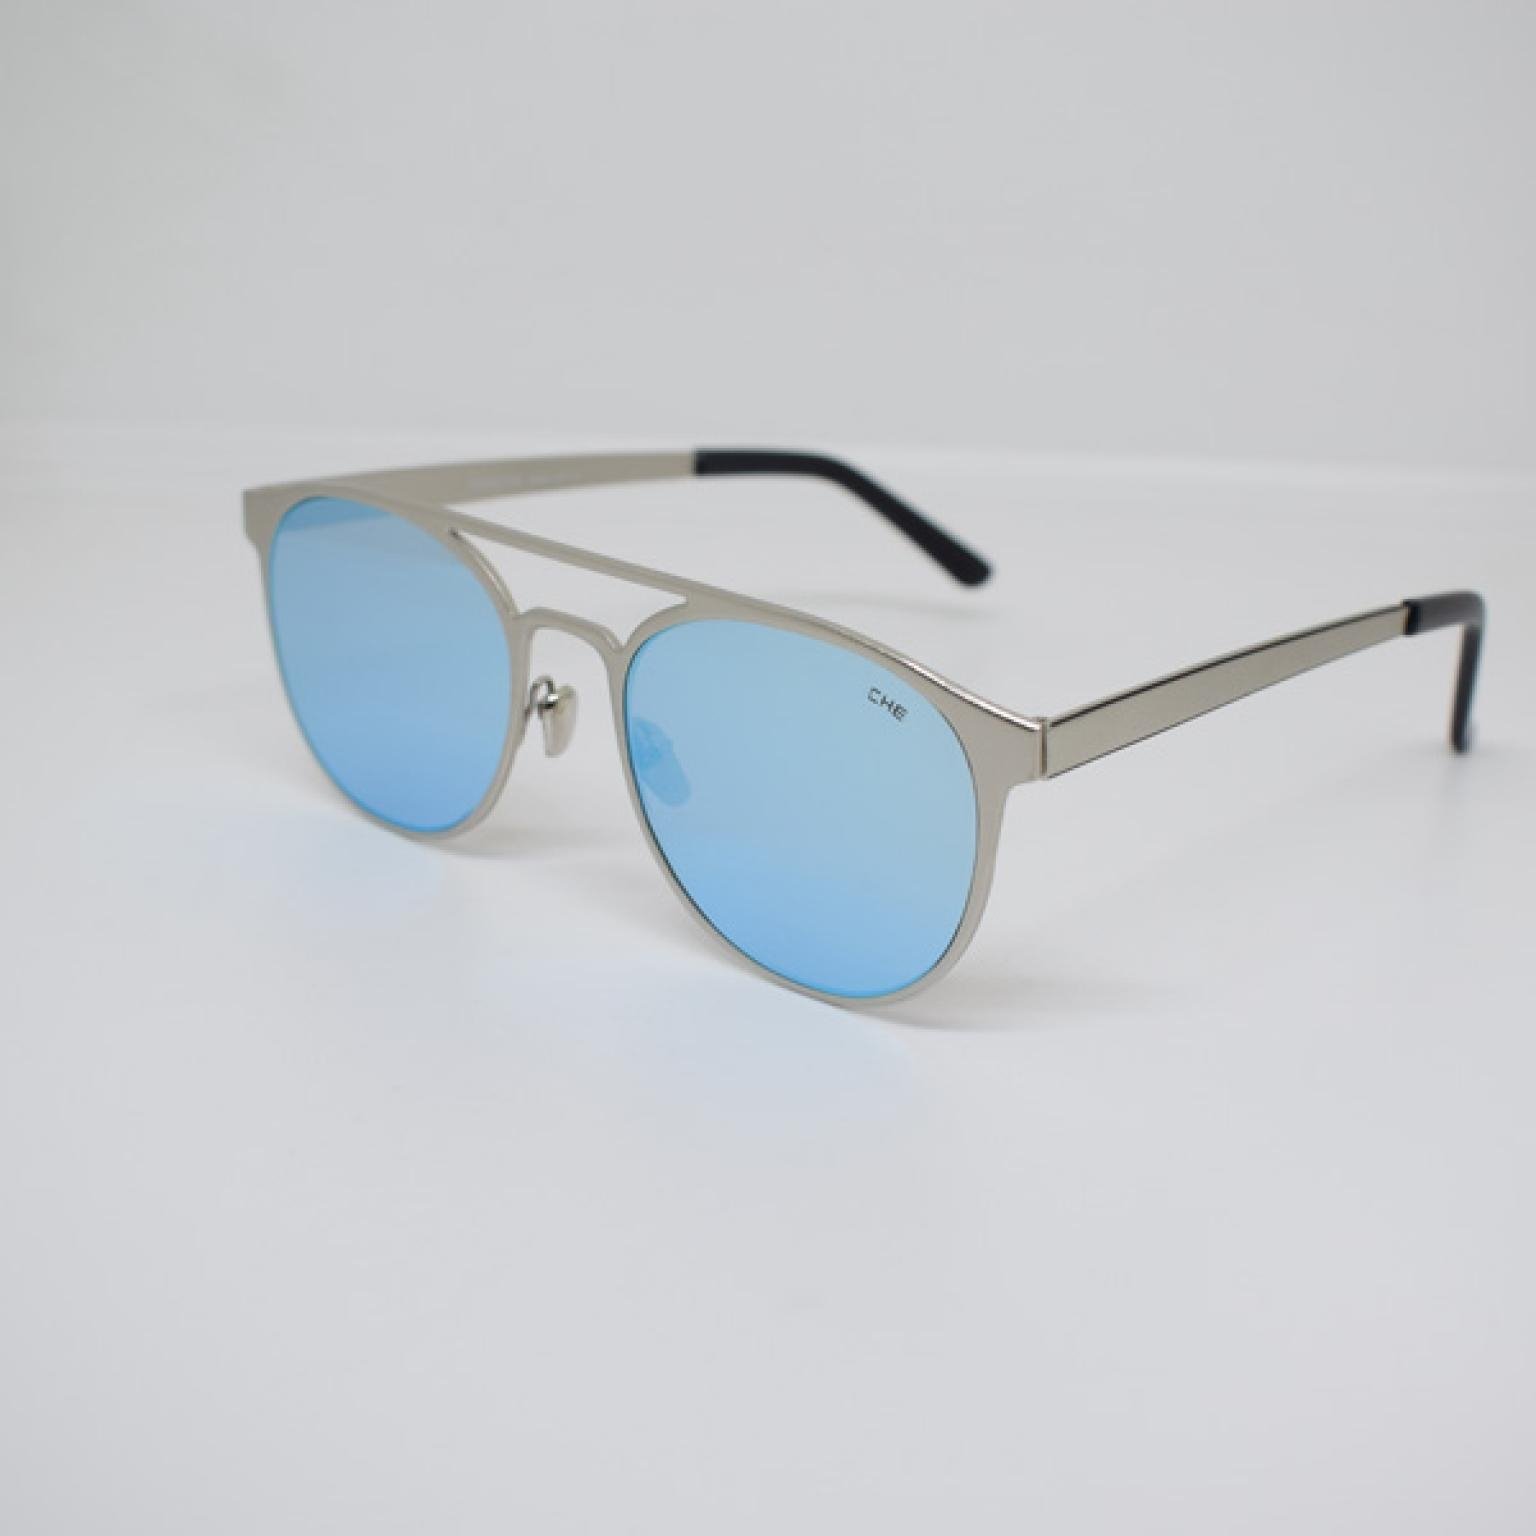 Unique design Stylish Unisex Most Trendy Sunglass For Men Women Uv400 Protected With Blue Silver Mercury Full Metal Body